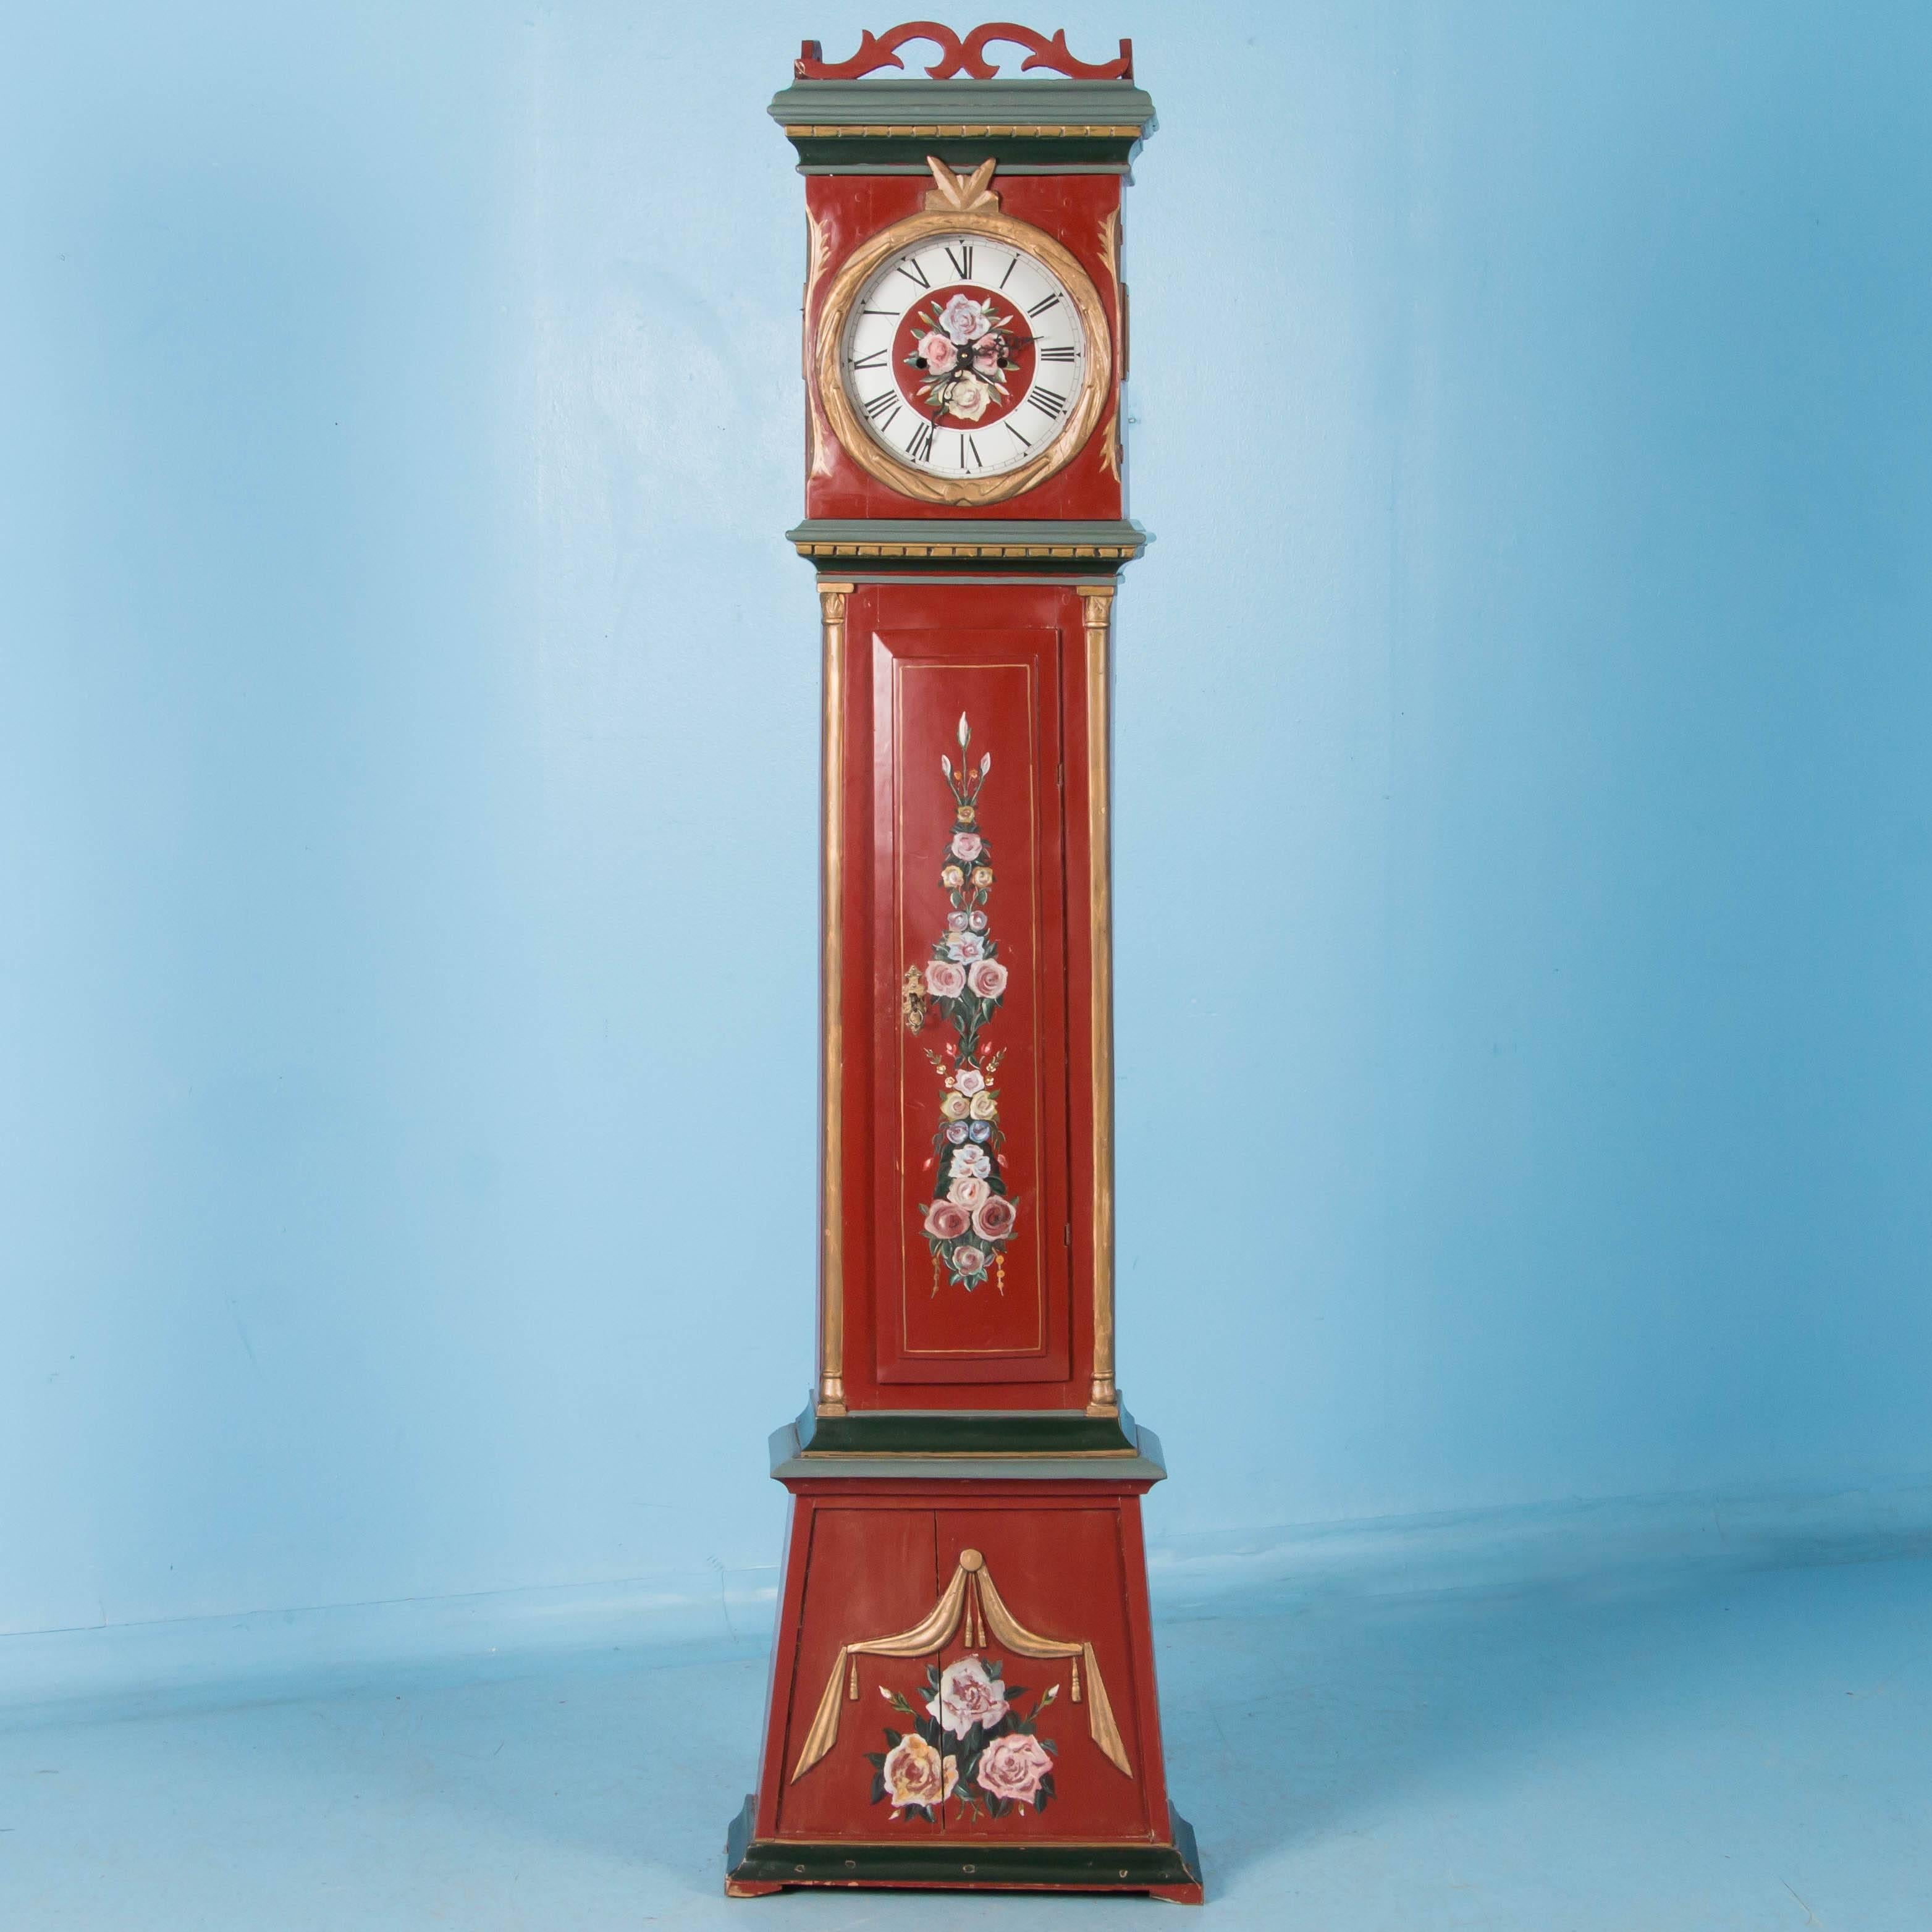 Danish tall clock painted red with accents of green and gold. The red background paint, polychrome accents and floral details are not original but painted more recently. The original clockworks have been removed and a battery pack installed. Please